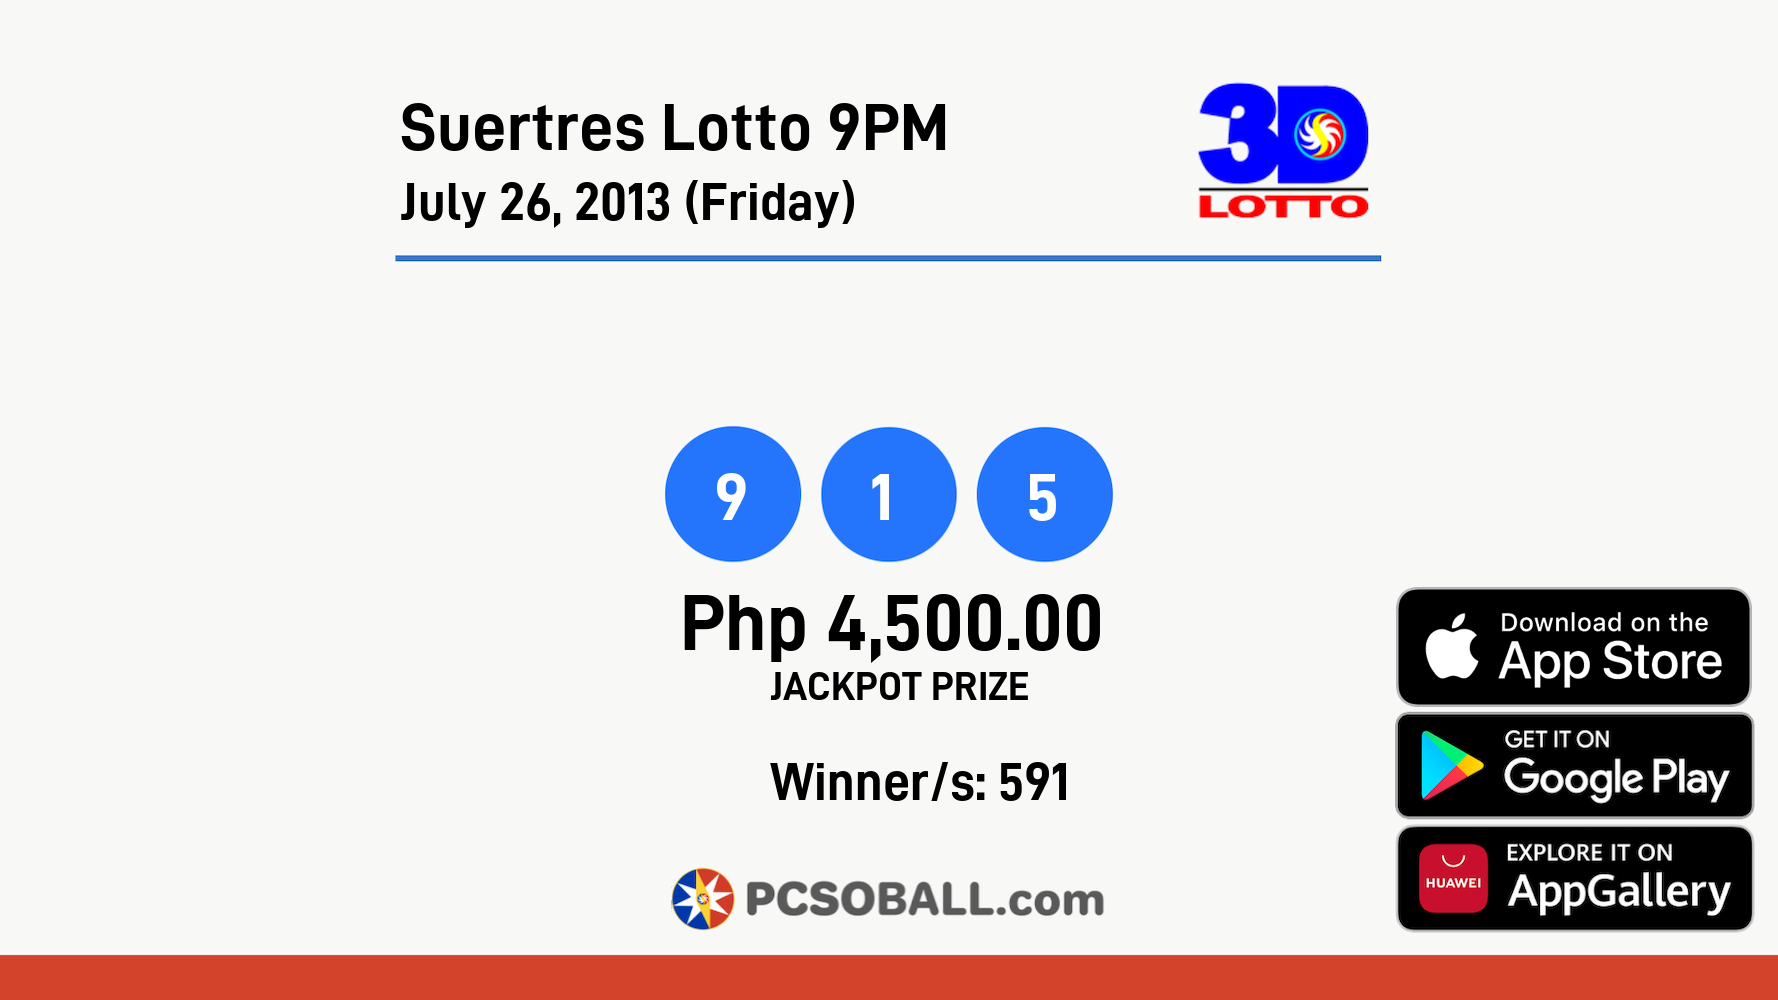 Suertres Lotto 9PM July 26, 2013 (Friday) Result